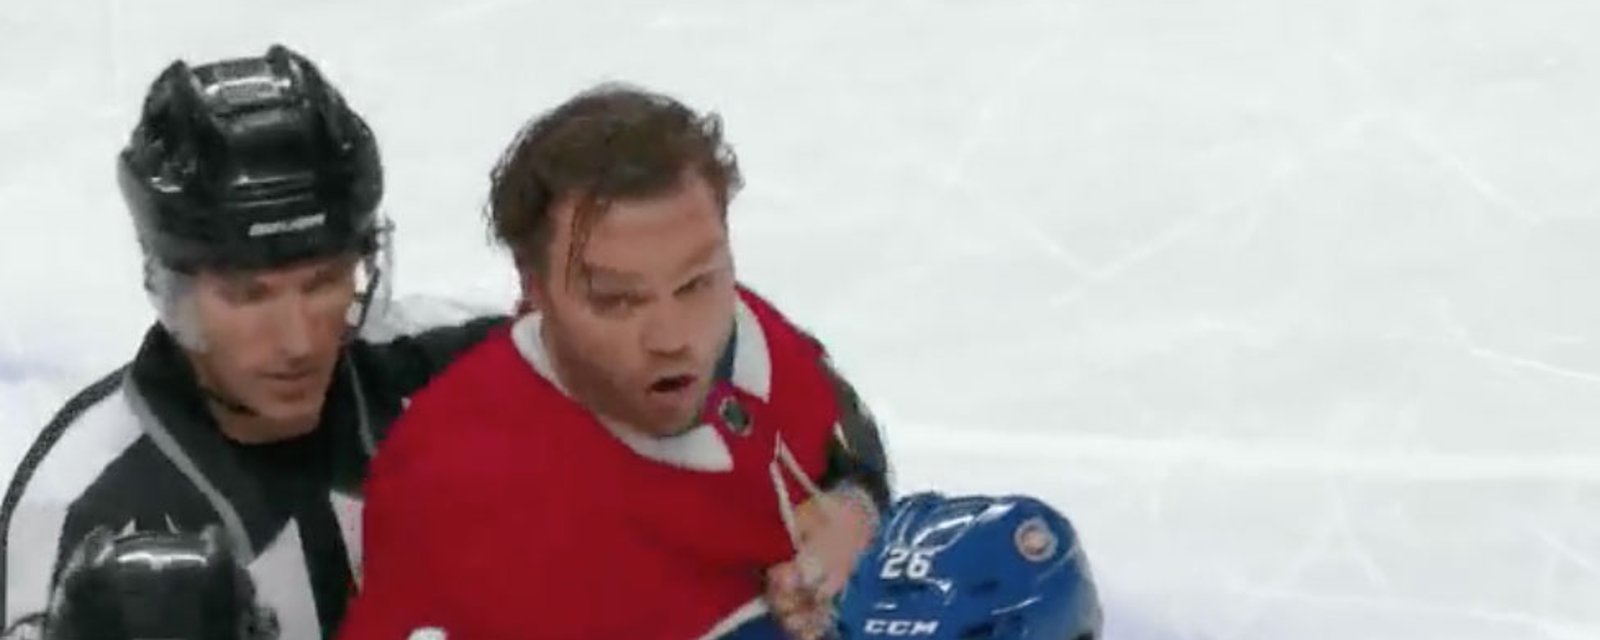 Domi chases down Dadonov like a mad man after getting kneed in the head!